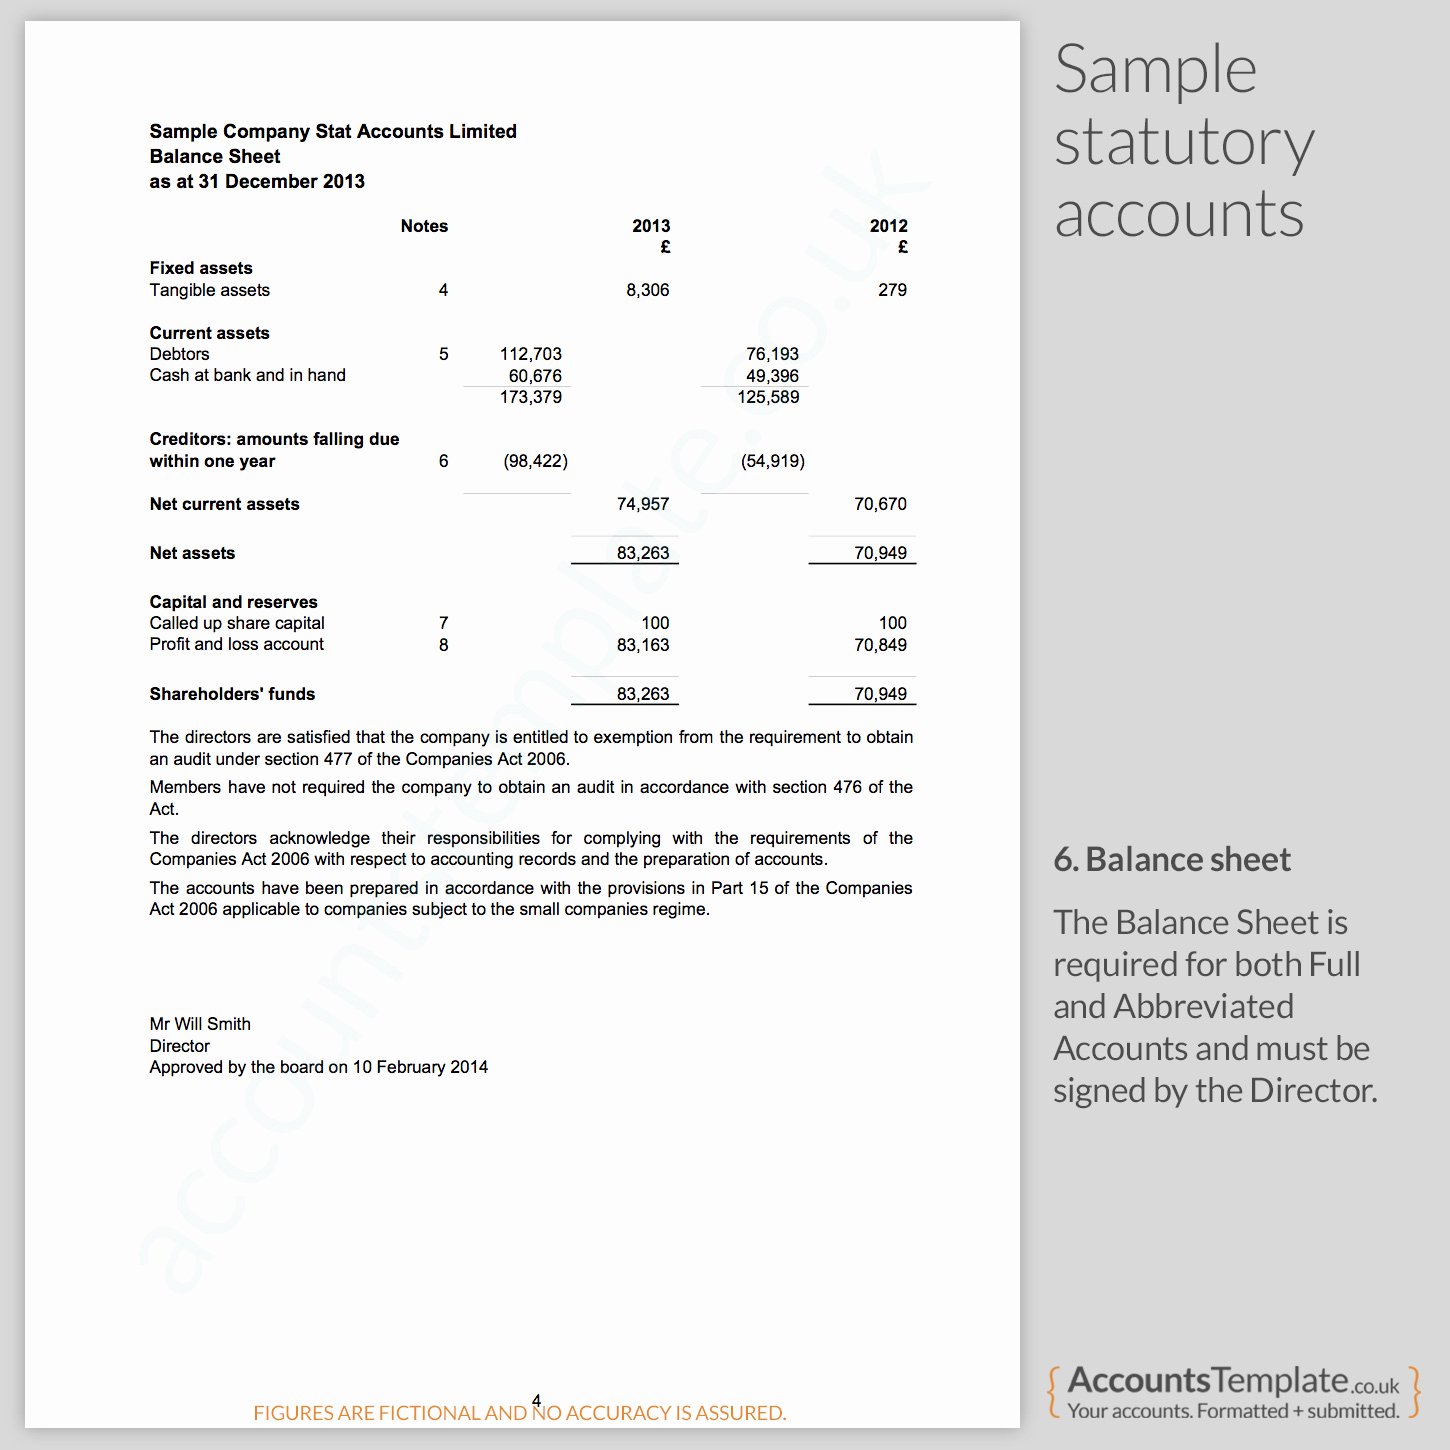 A Guide to the Statutory Accounts format